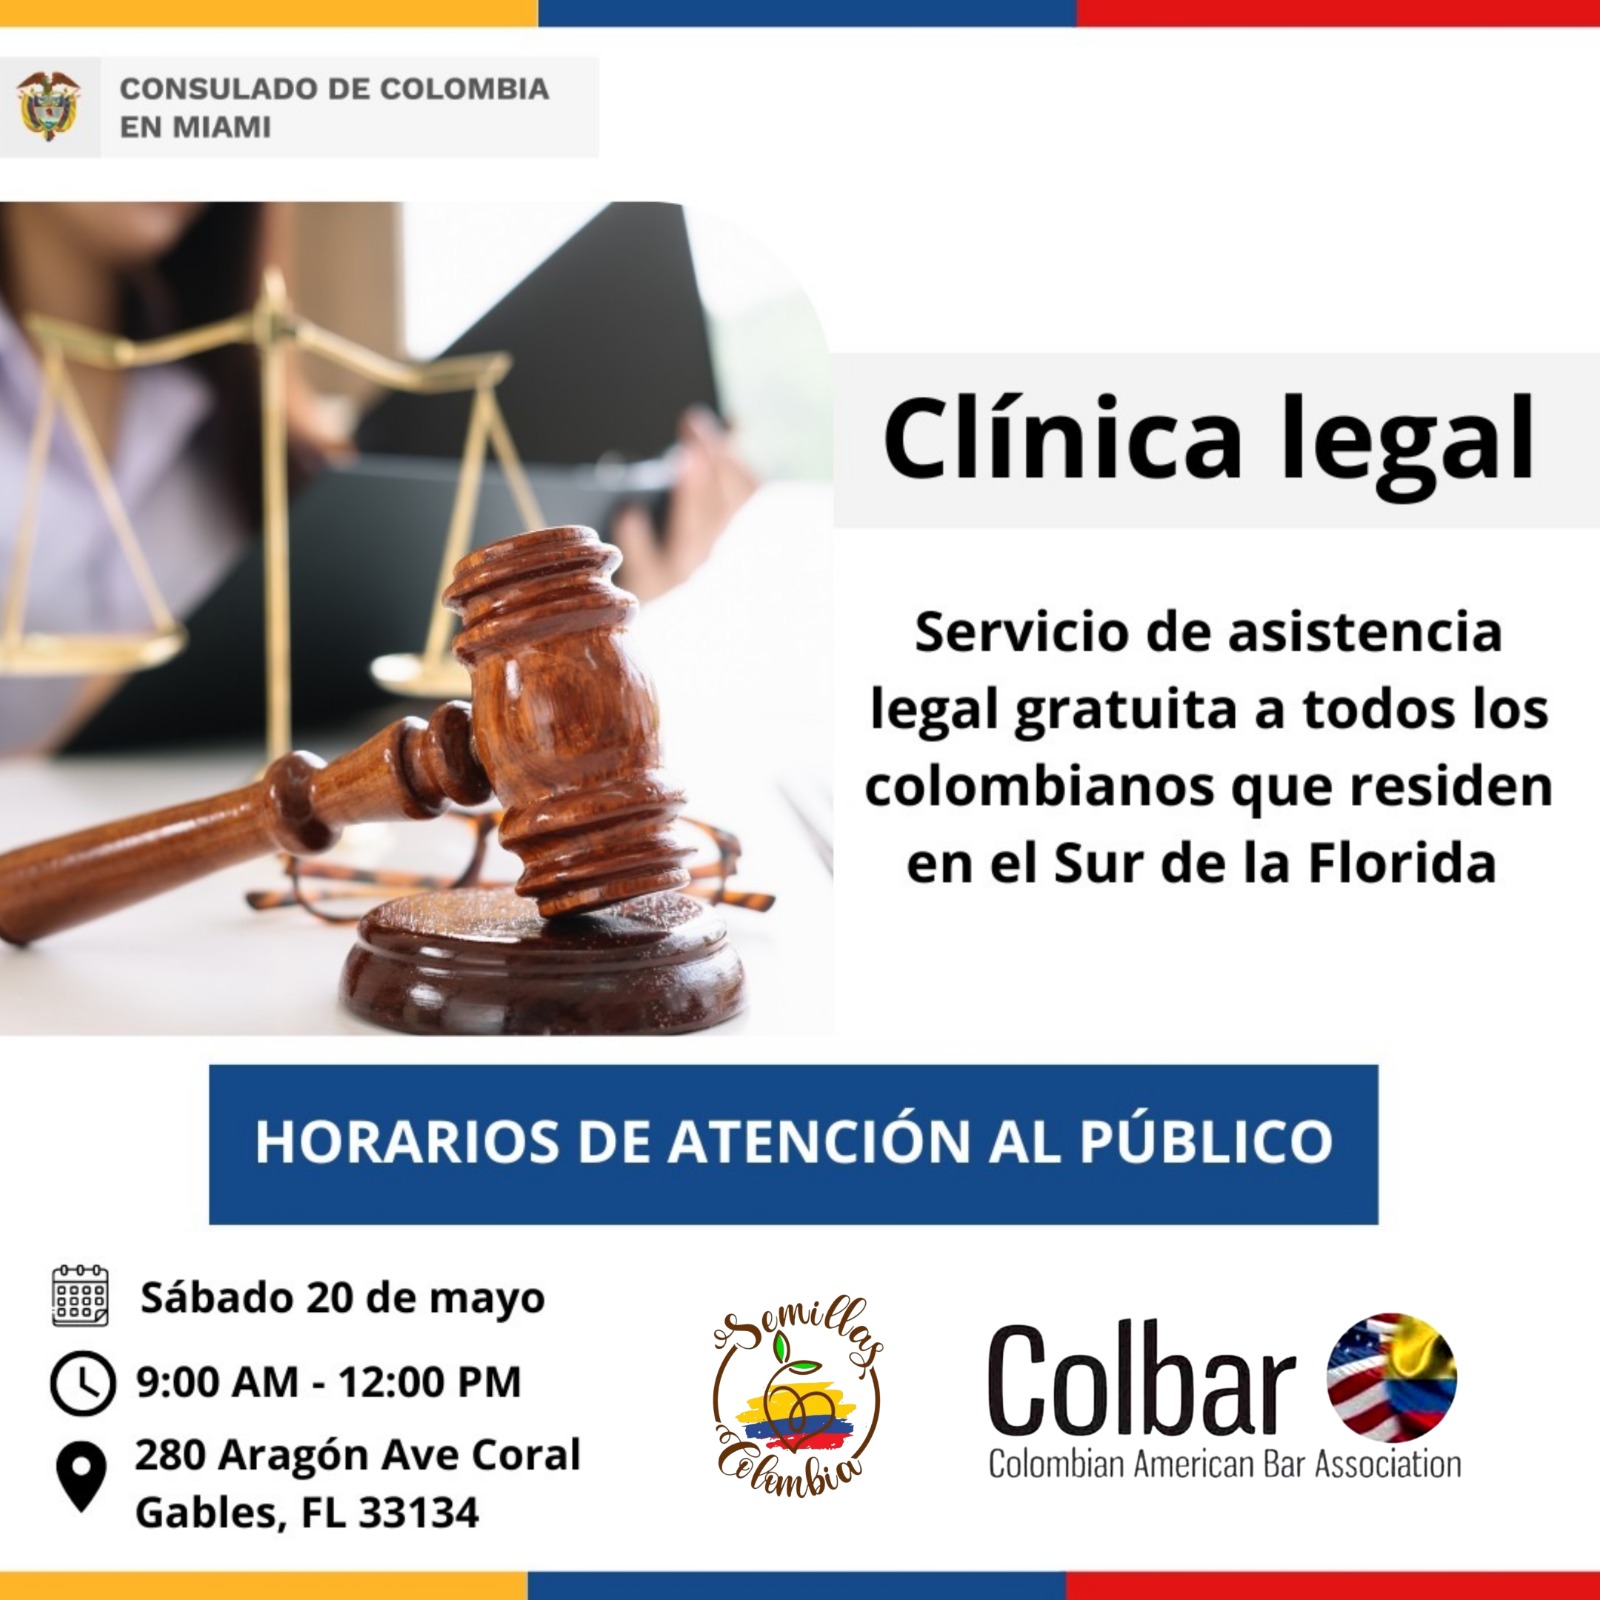 COLBAR & The Consulate of Colombia are Hosting Free Legal Clinics